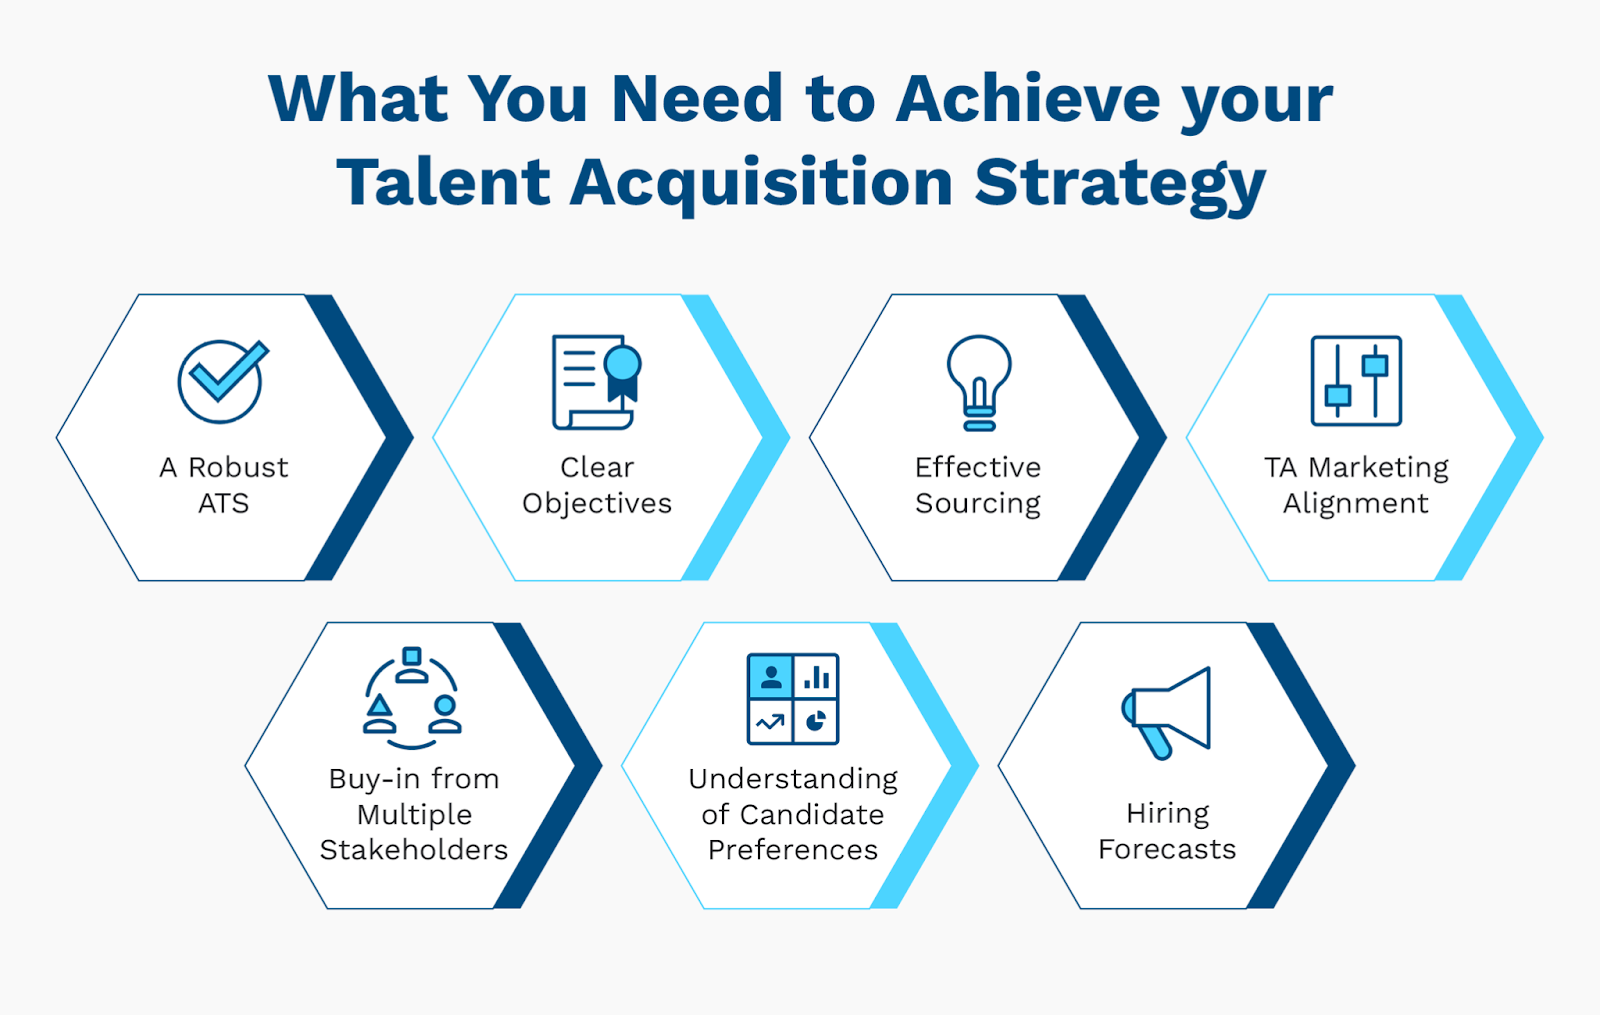 What you need to achieve your talent acquisition strategy (as explained below)